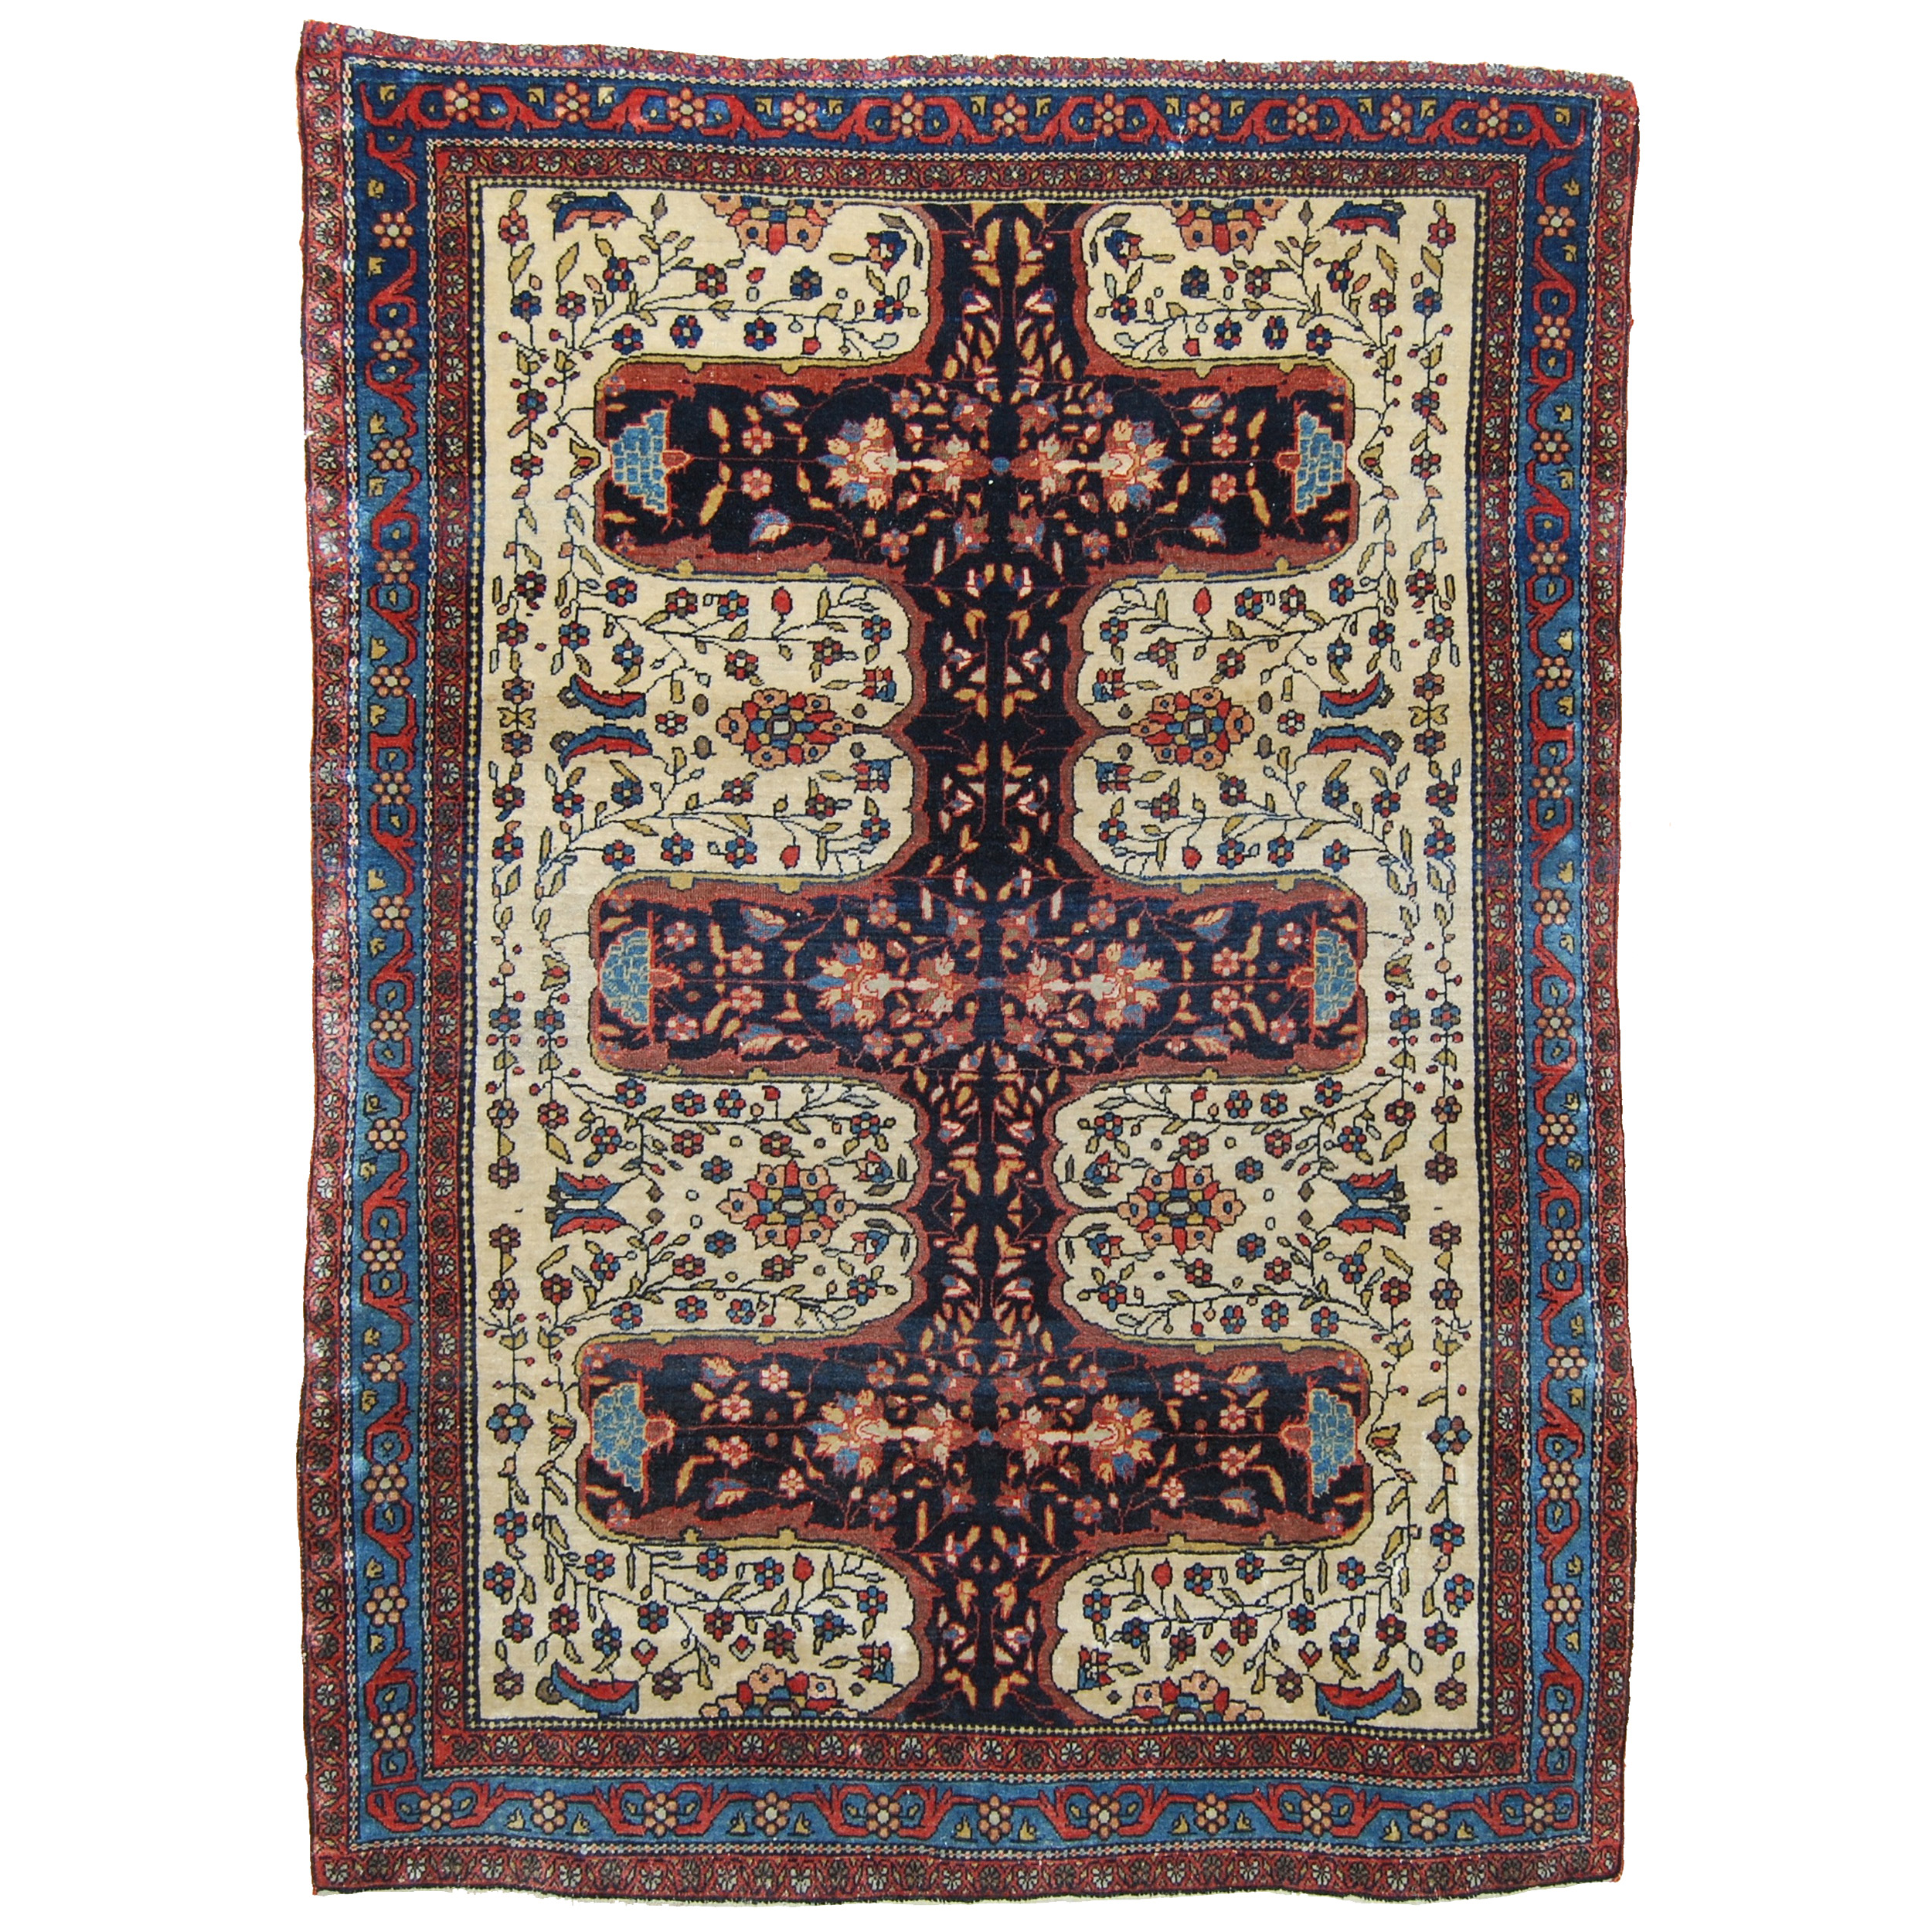 Douglas Stock Gallery Antique Oriental Rug Research Archives, antique Persian Fereghan Sarouk rug, antique rugs Boston,MA area